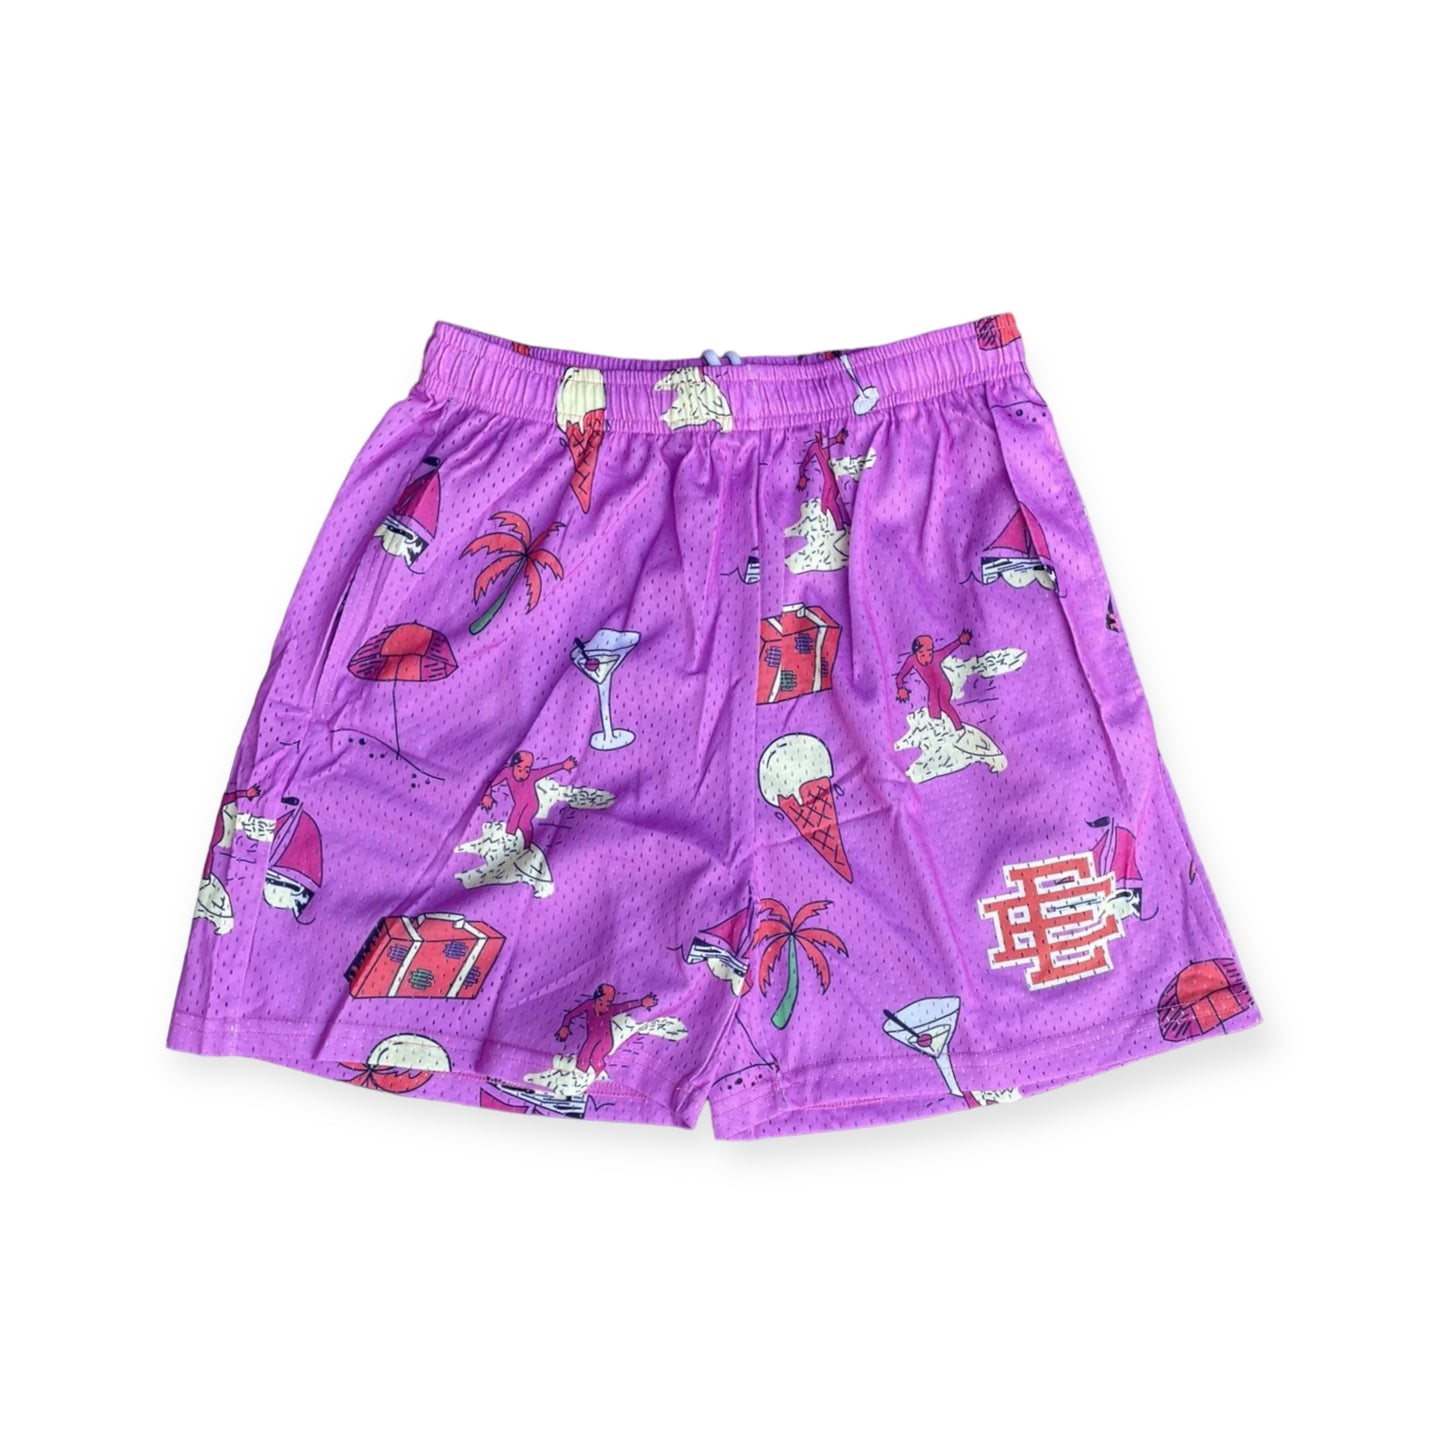 Brand New Eric Emanuel Pink Toons Shorts Size L